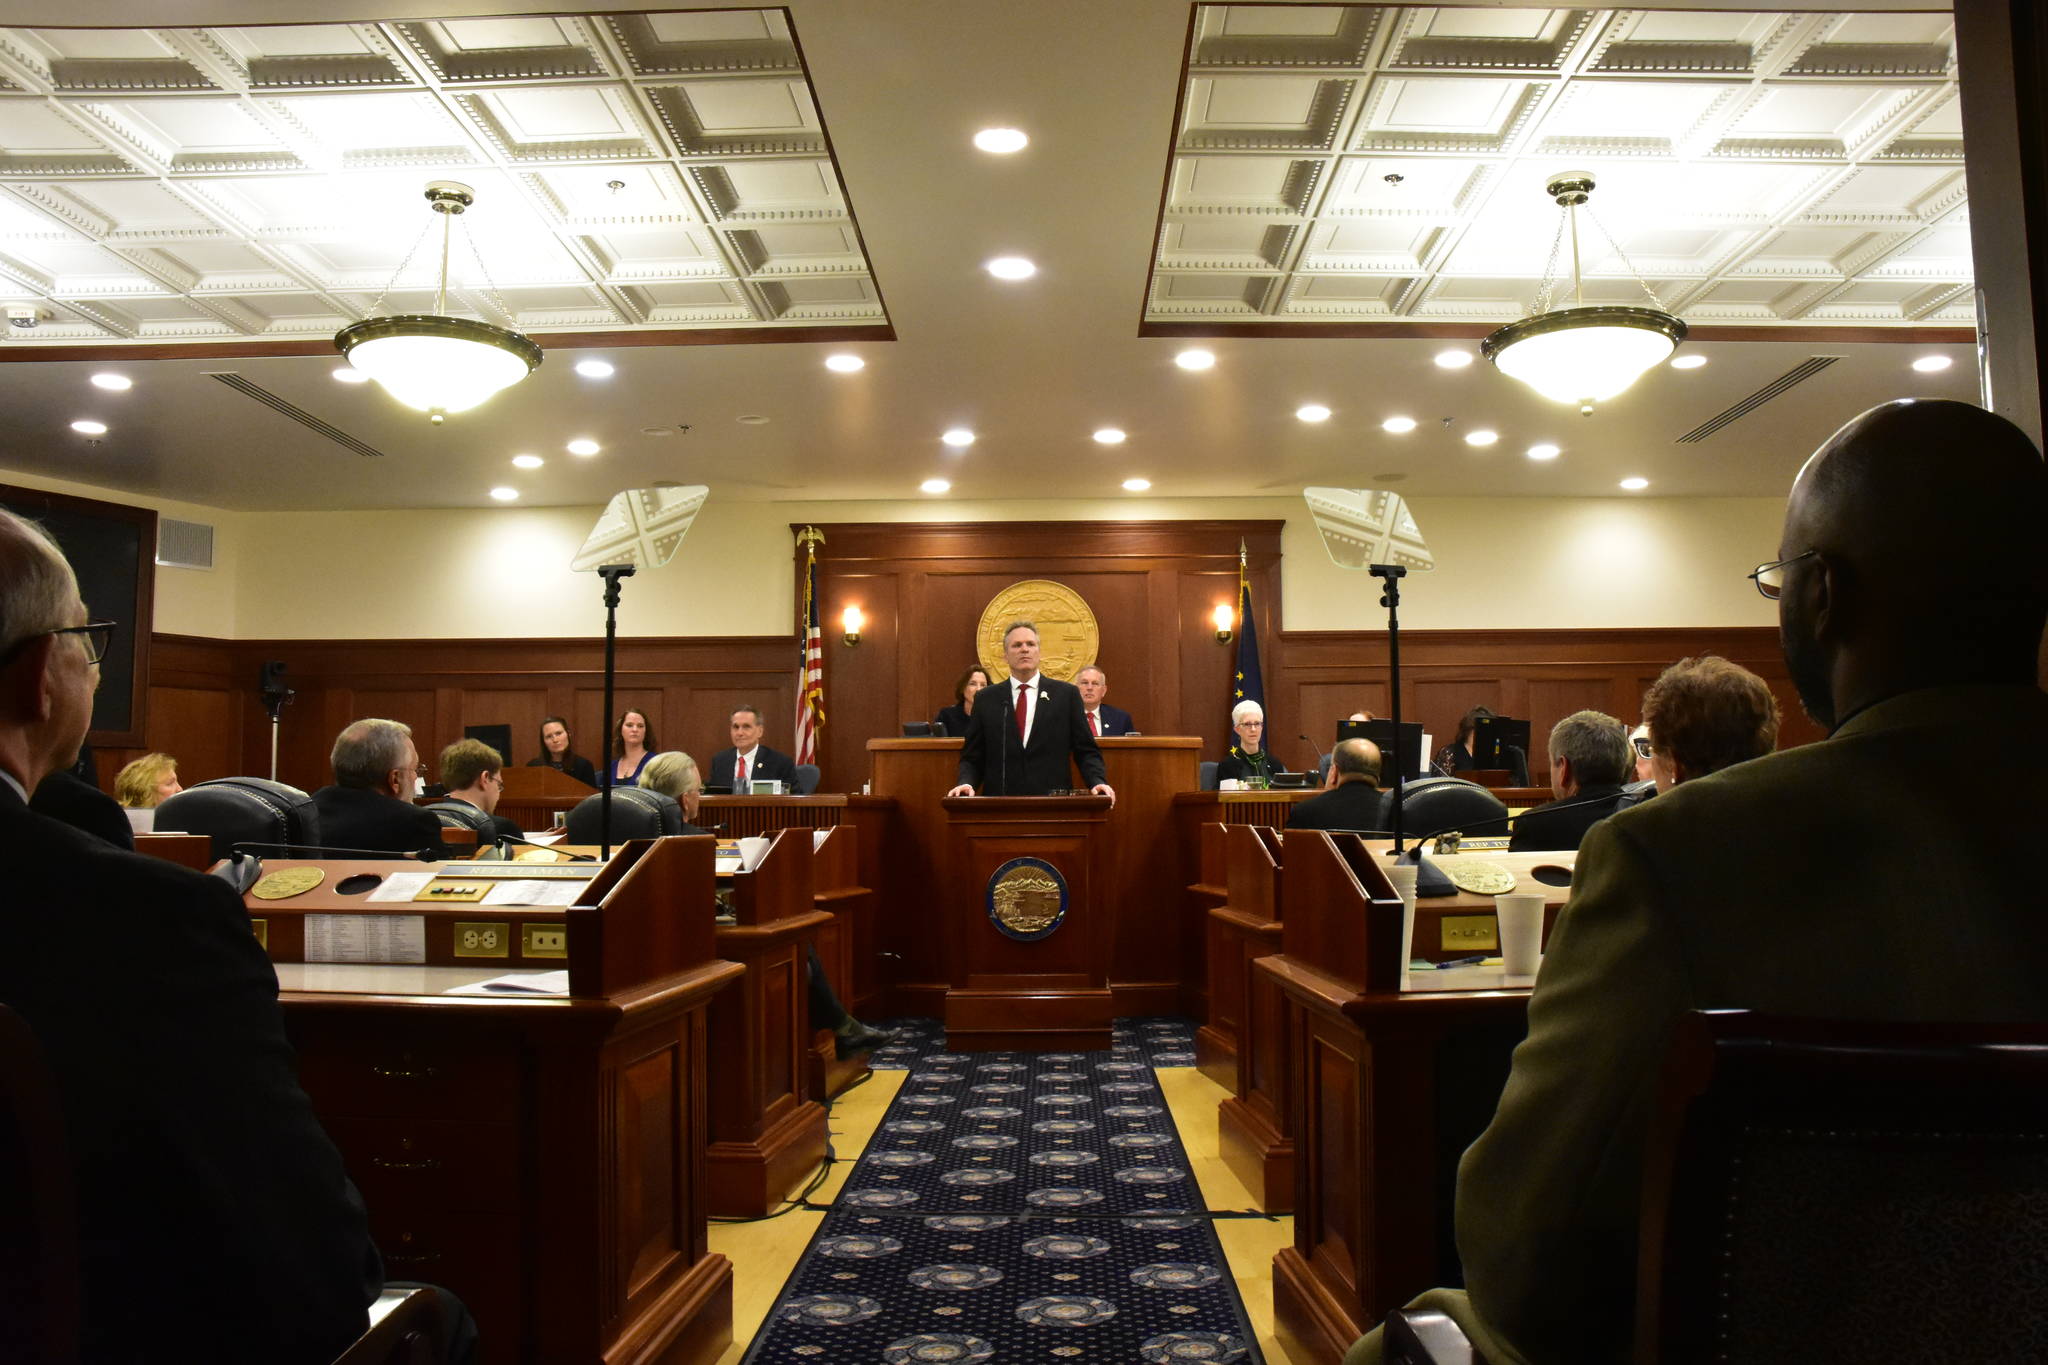 Gov. Mike Dunleavy gives his State of the State address before a joint session of the Alaska Legislature on Monday, Jan. 27, 2020. (Peter Segall | Juneau Empire)